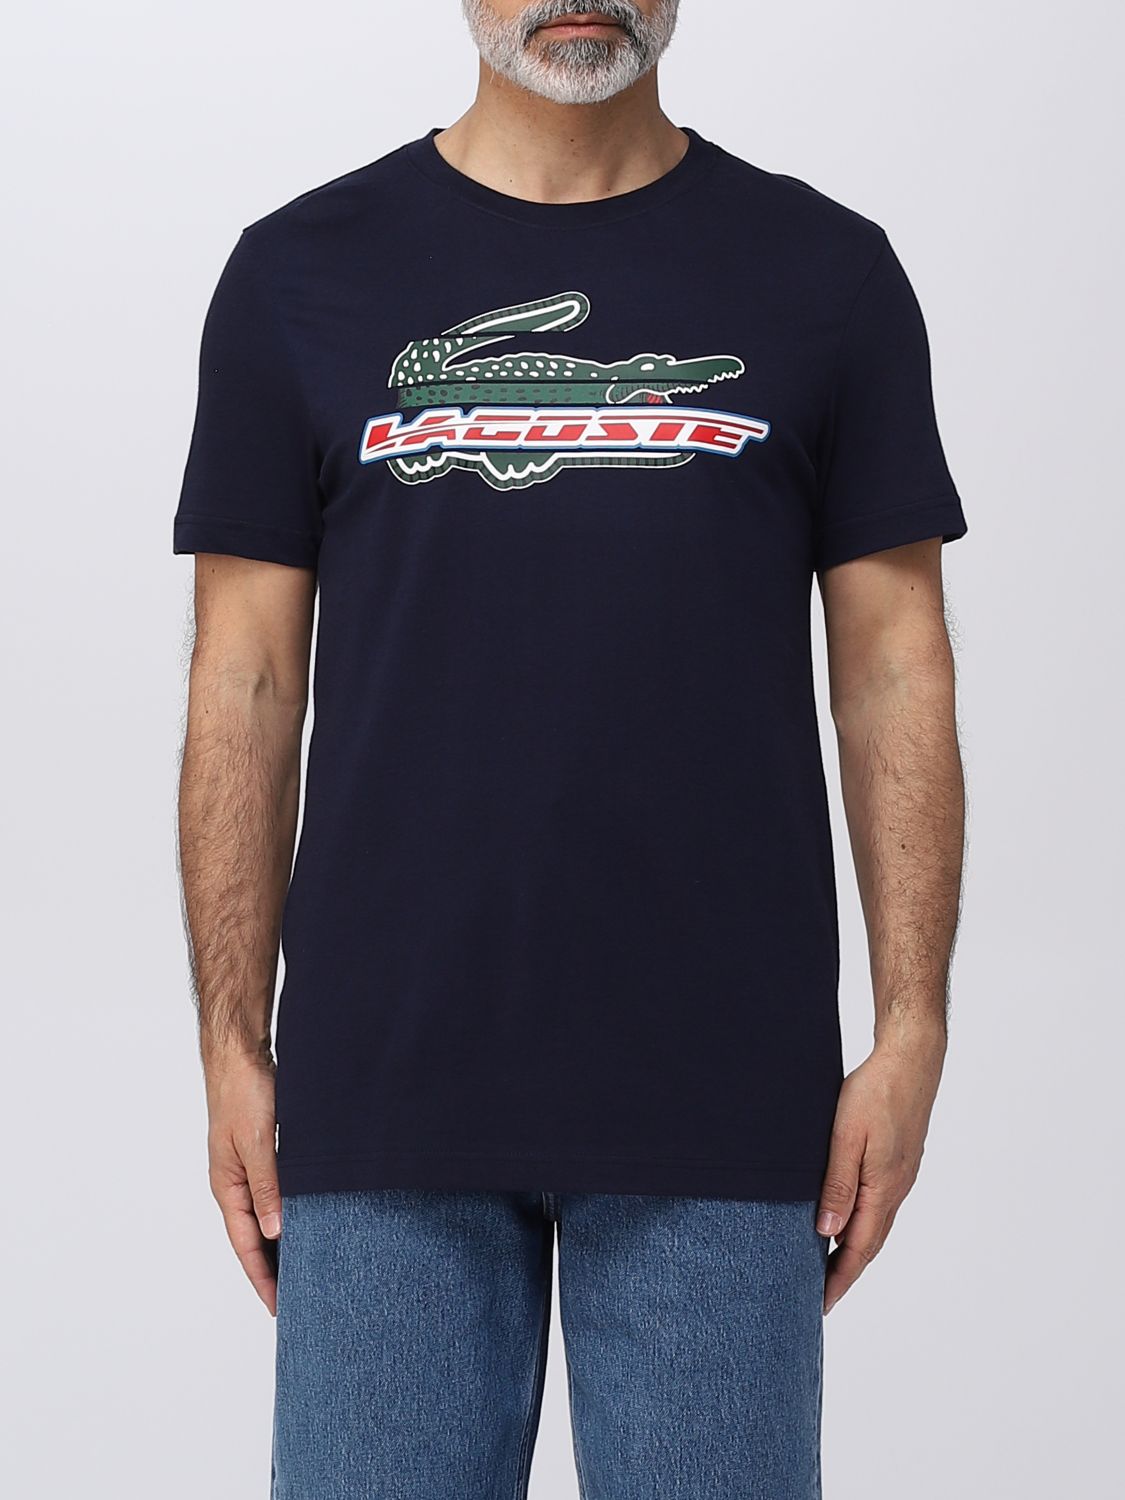 Darmen hout fax LACOSTE: t-shirt for man - Navy | Lacoste t-shirt TH5156 online on  GIGLIO.COM